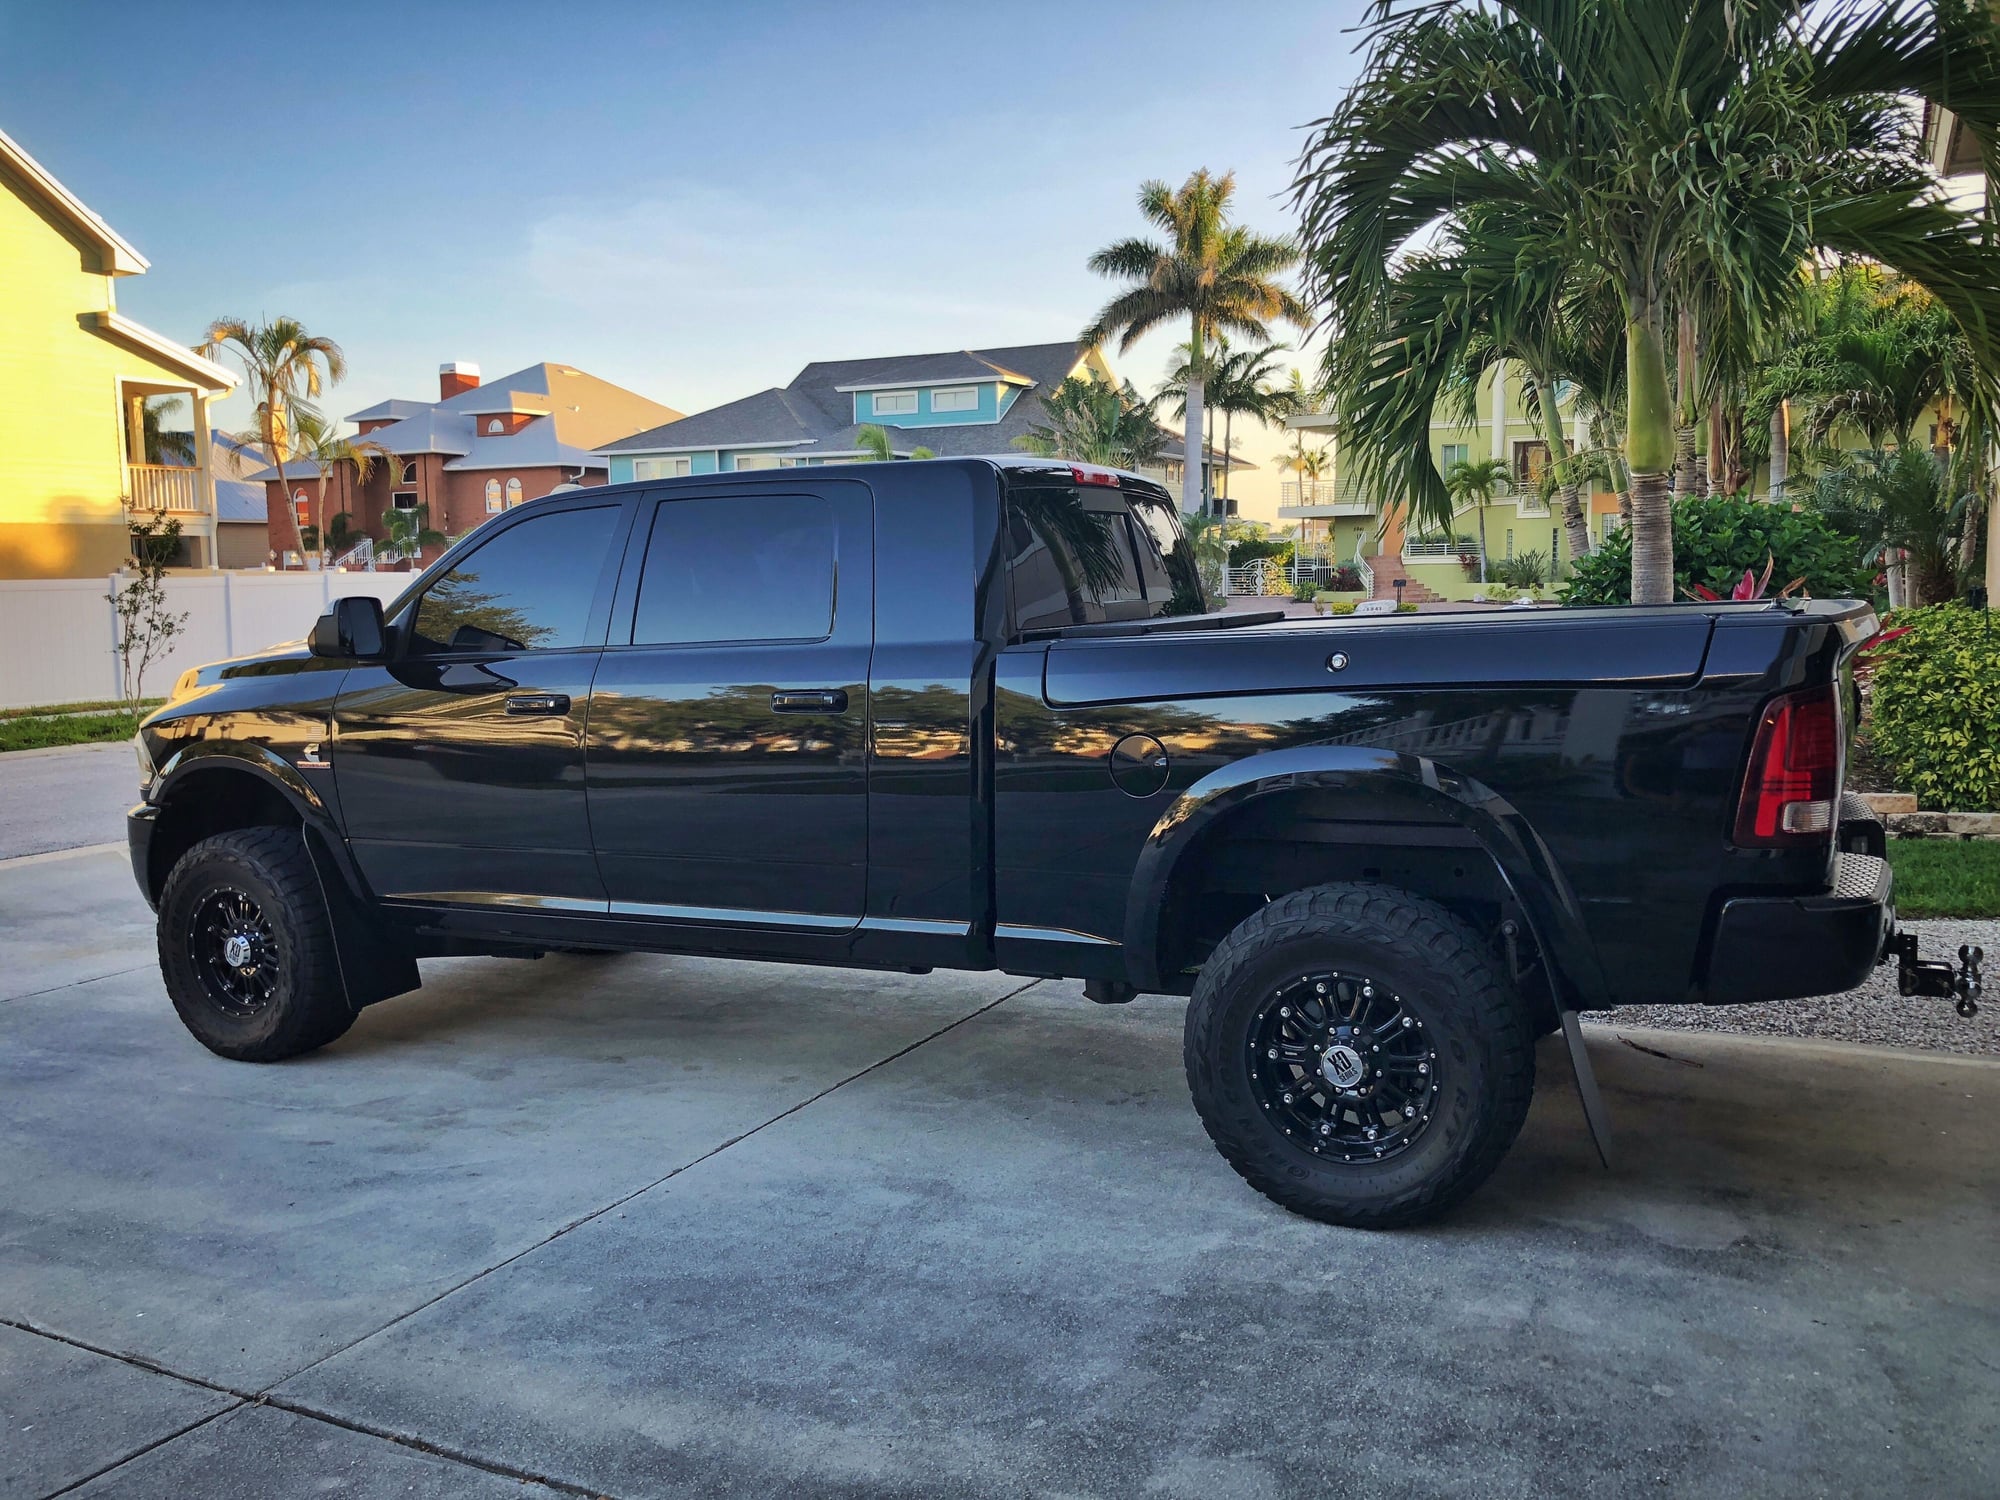 2017 ram 2500 mega cab with rambox for sale